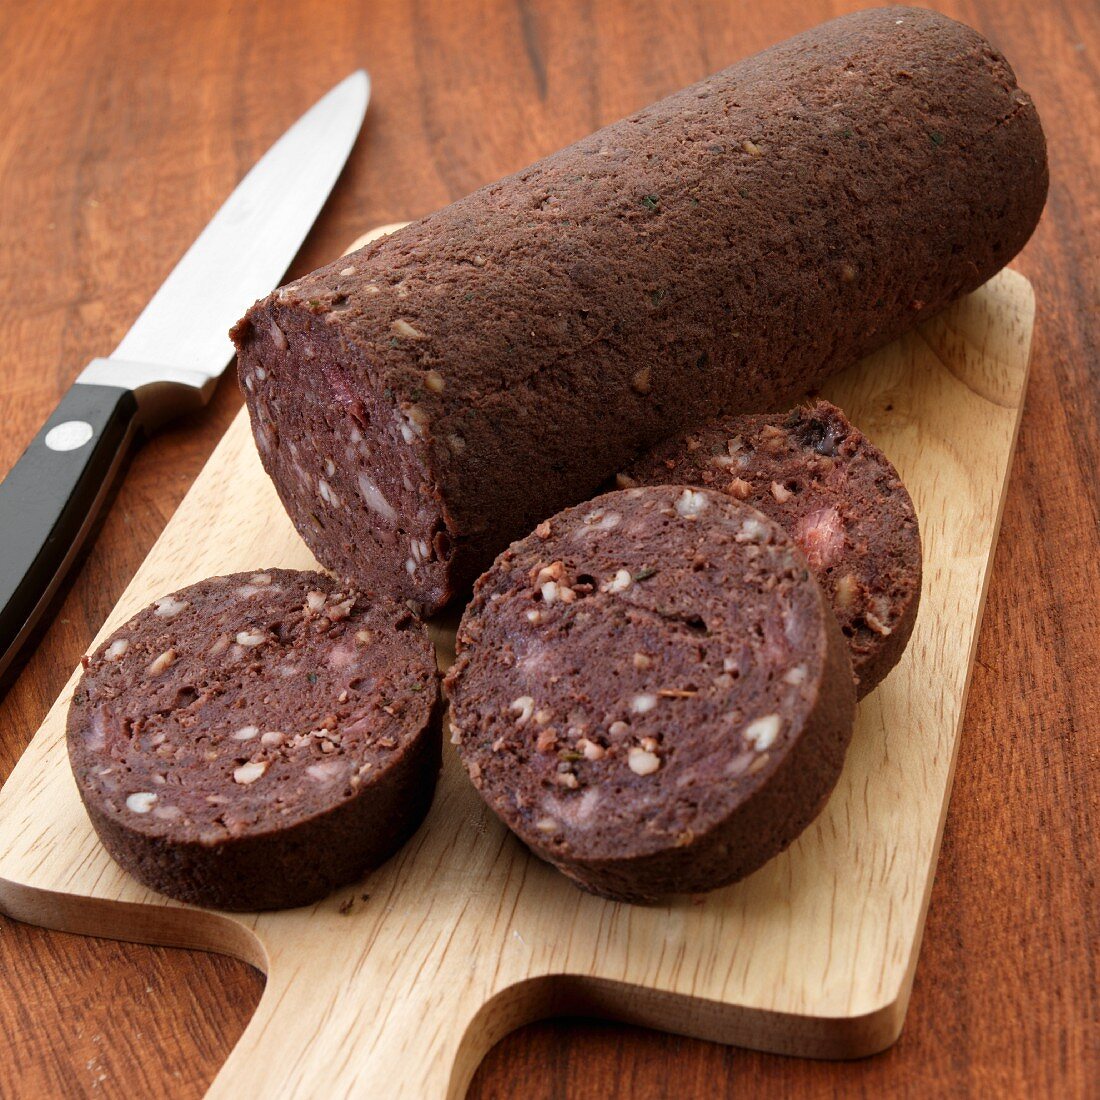 Uncooked English black pudding on cutting board with knife